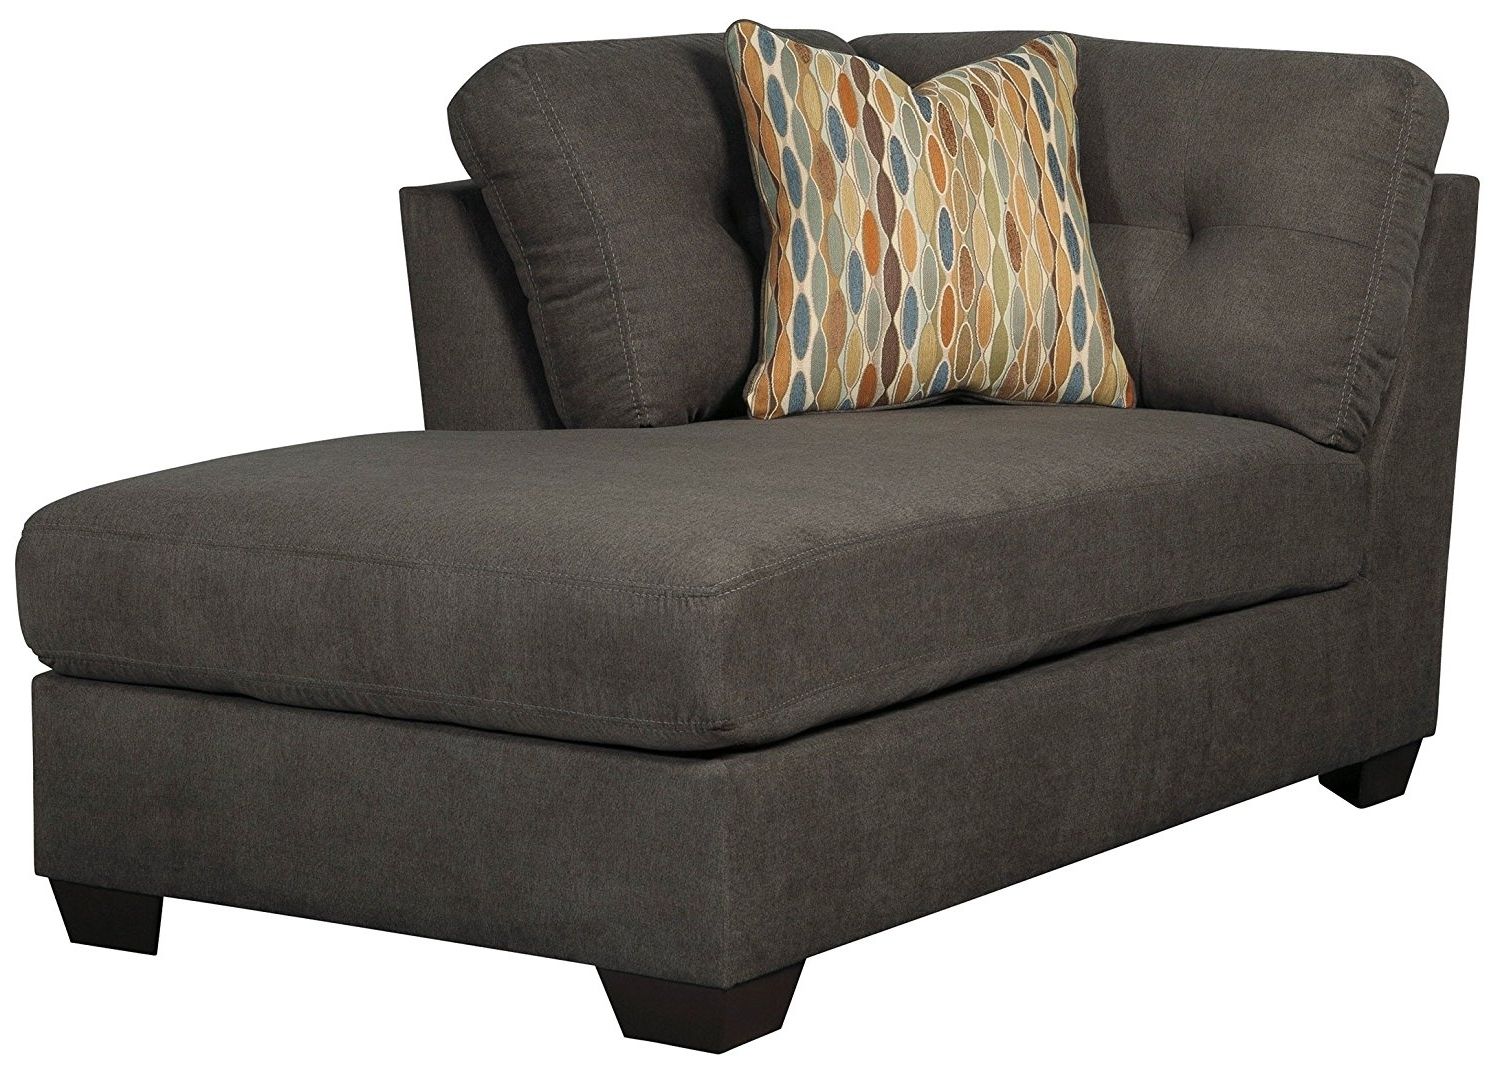 Amazon: Ashley Furniture Delta City Right Corner Chaise Lounge Intended For Most Up To Date Corner Chaise Lounges (View 1 of 15)